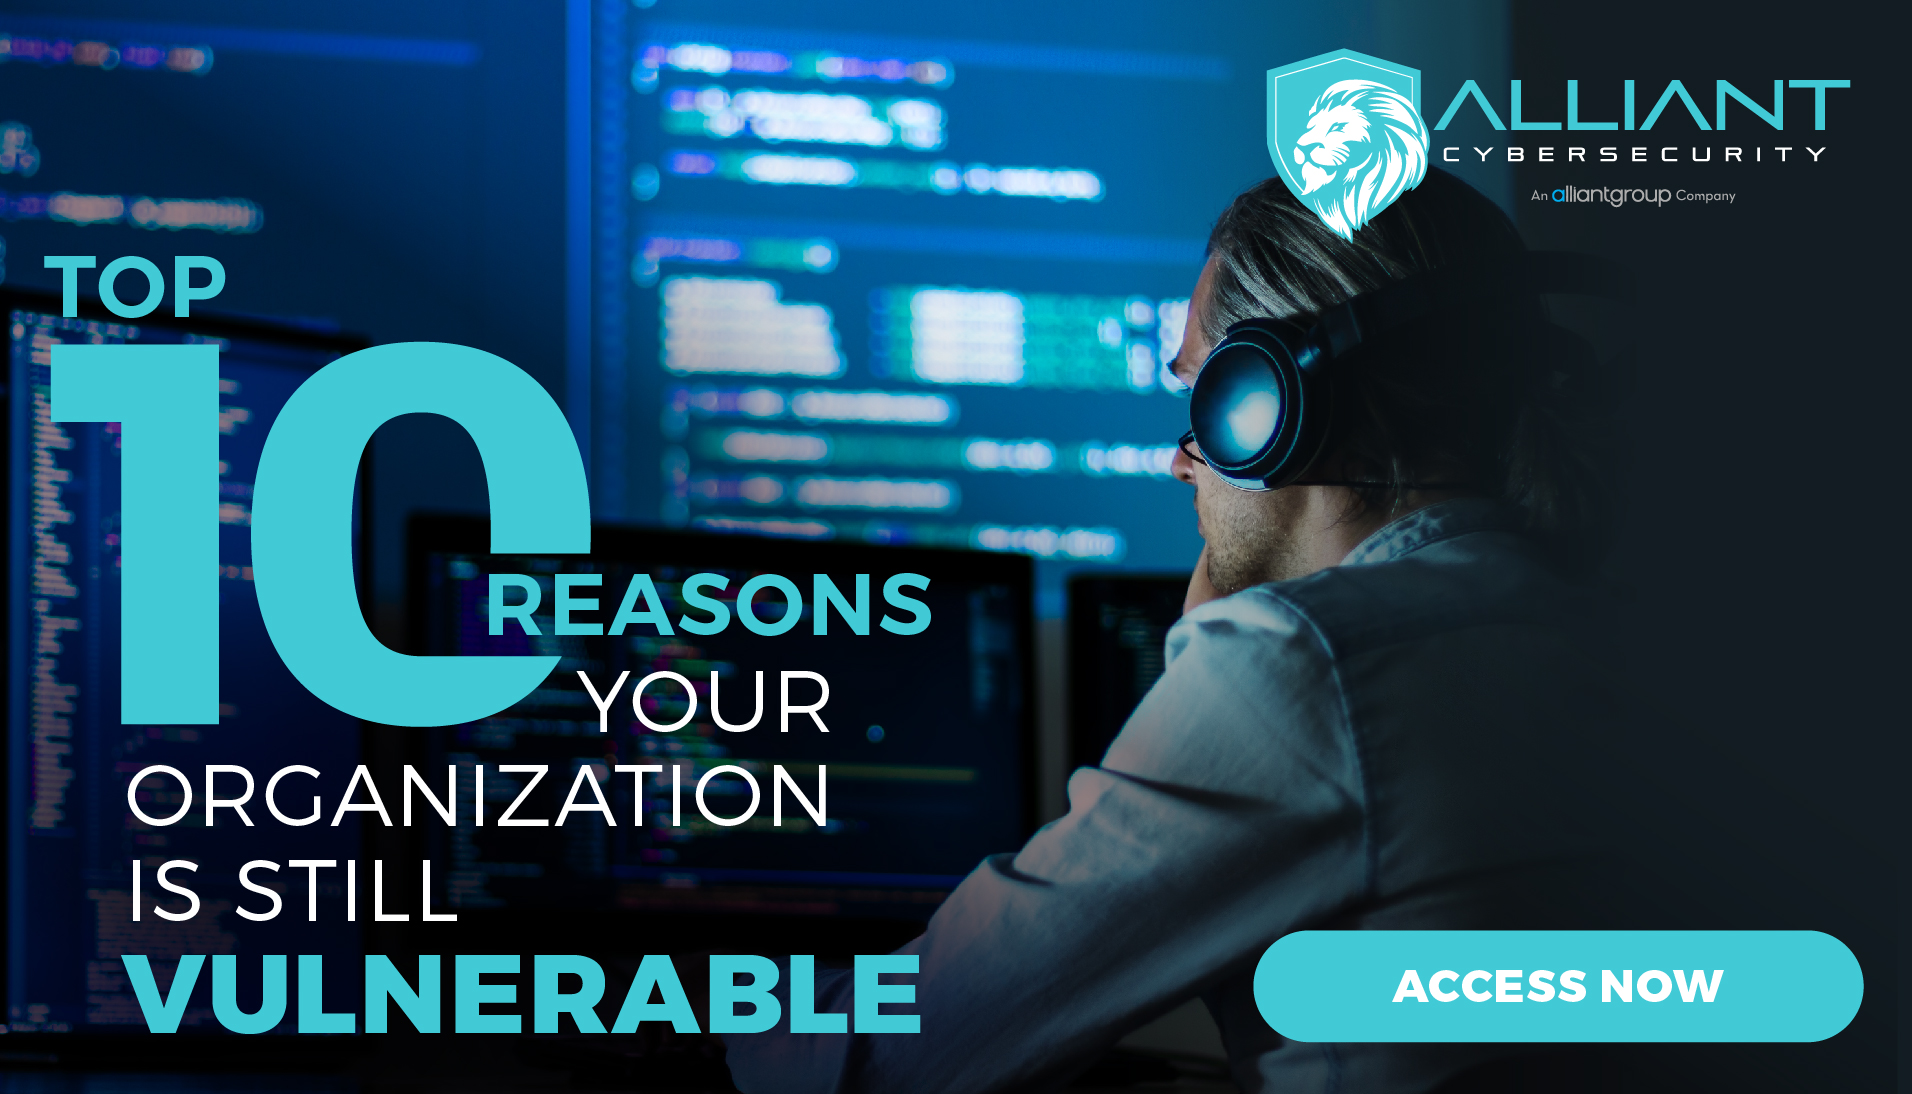 Top Ten Reasons Your Organization is Still Vulnerable to Cyber Attack